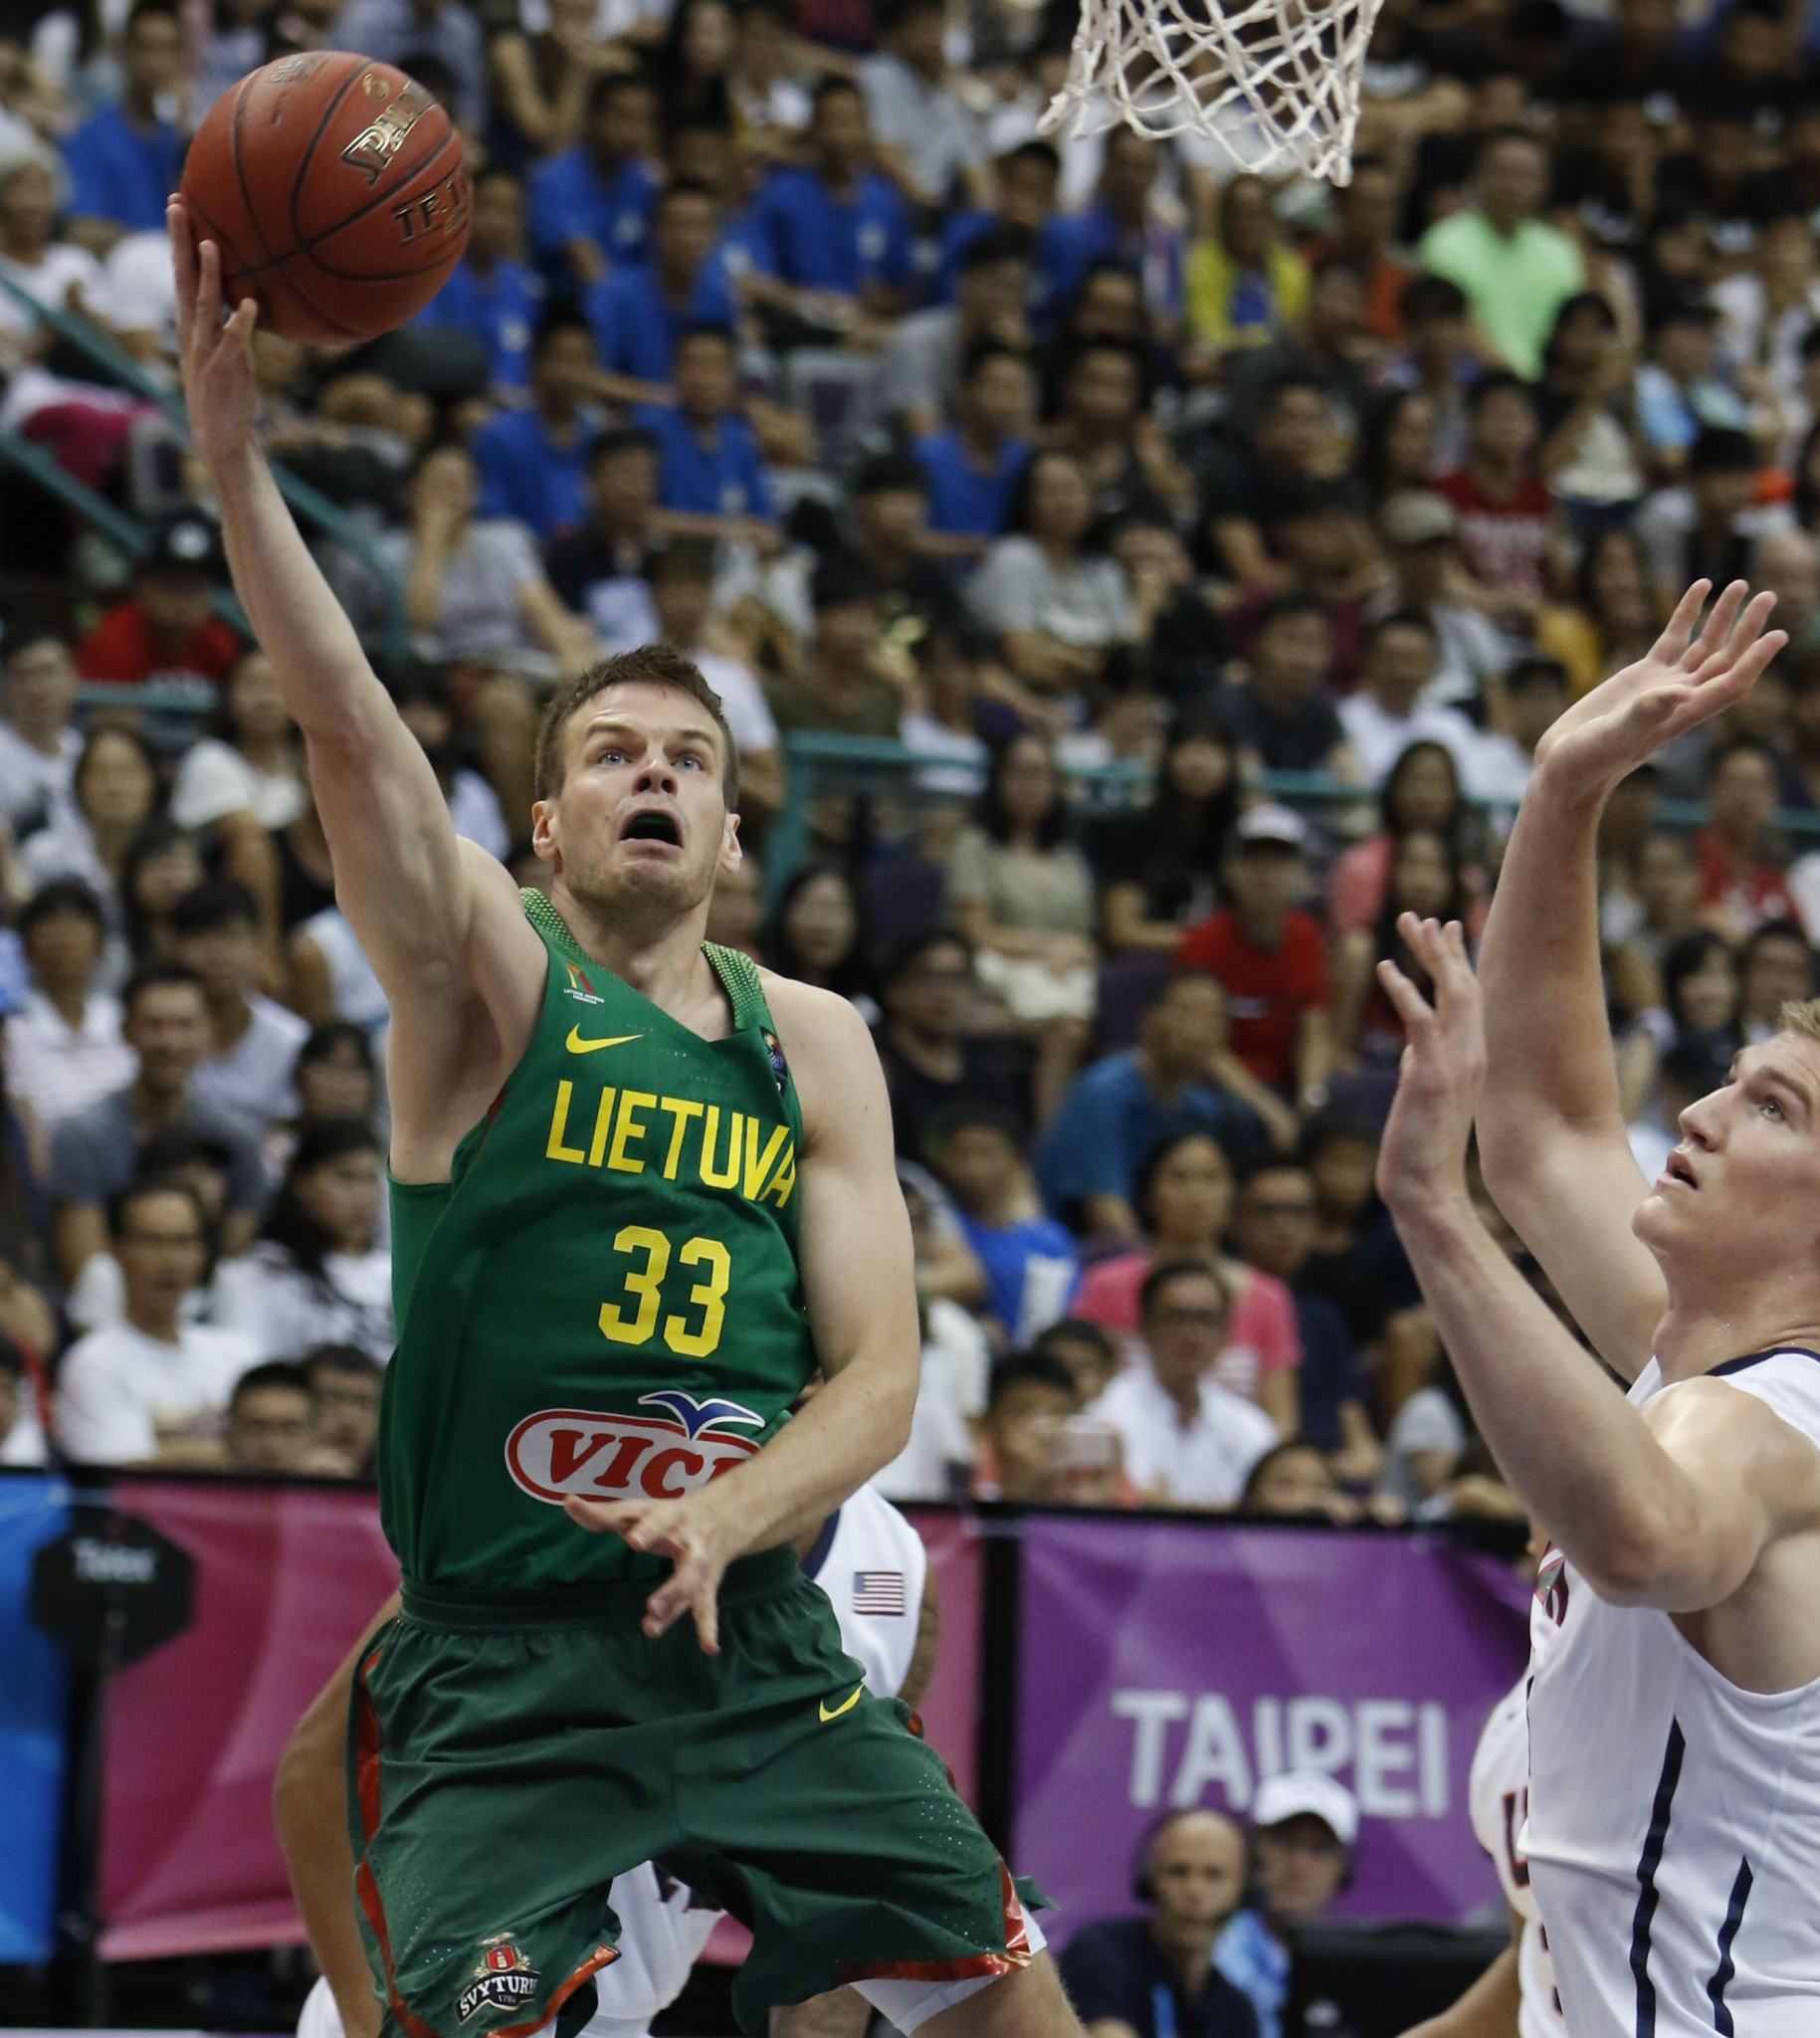 Lithuania upset the United States to win men’s basketball gold ©Taipei 2017